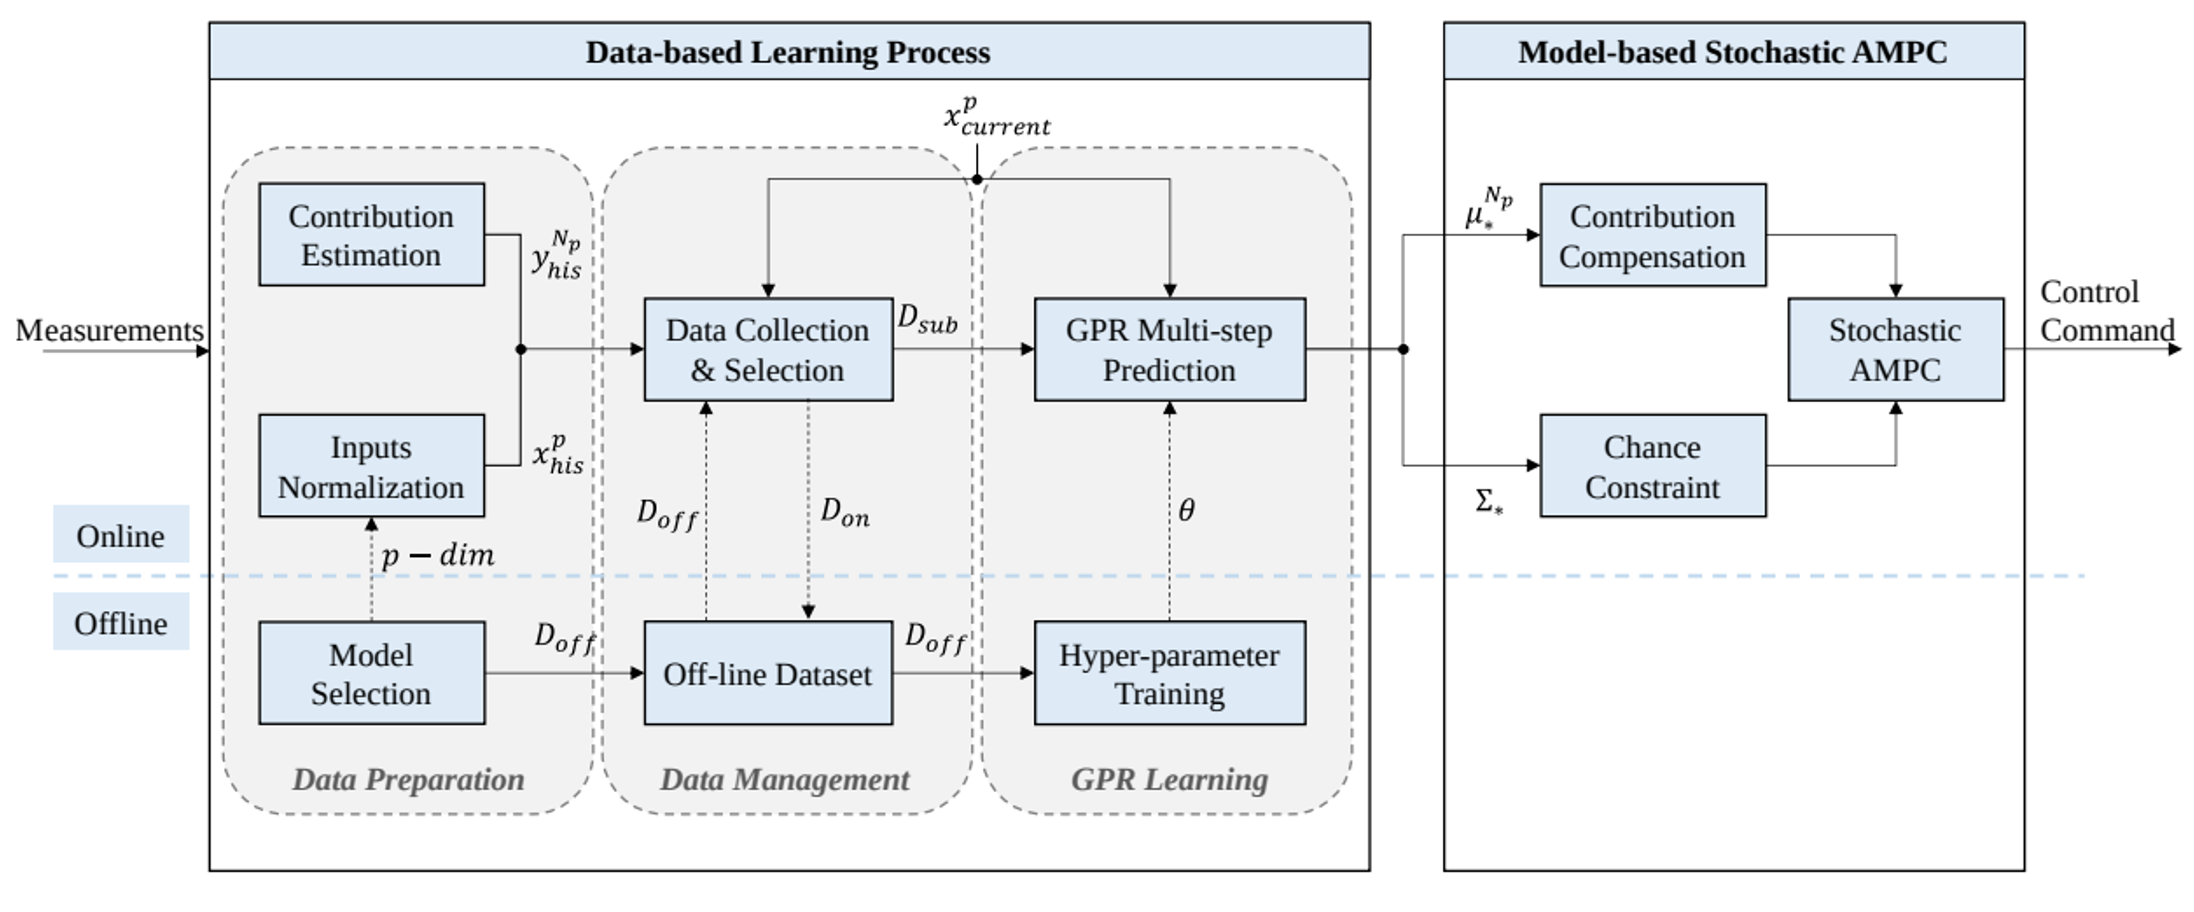 Data-based Learning Process and Model-based Stochastic AMPC